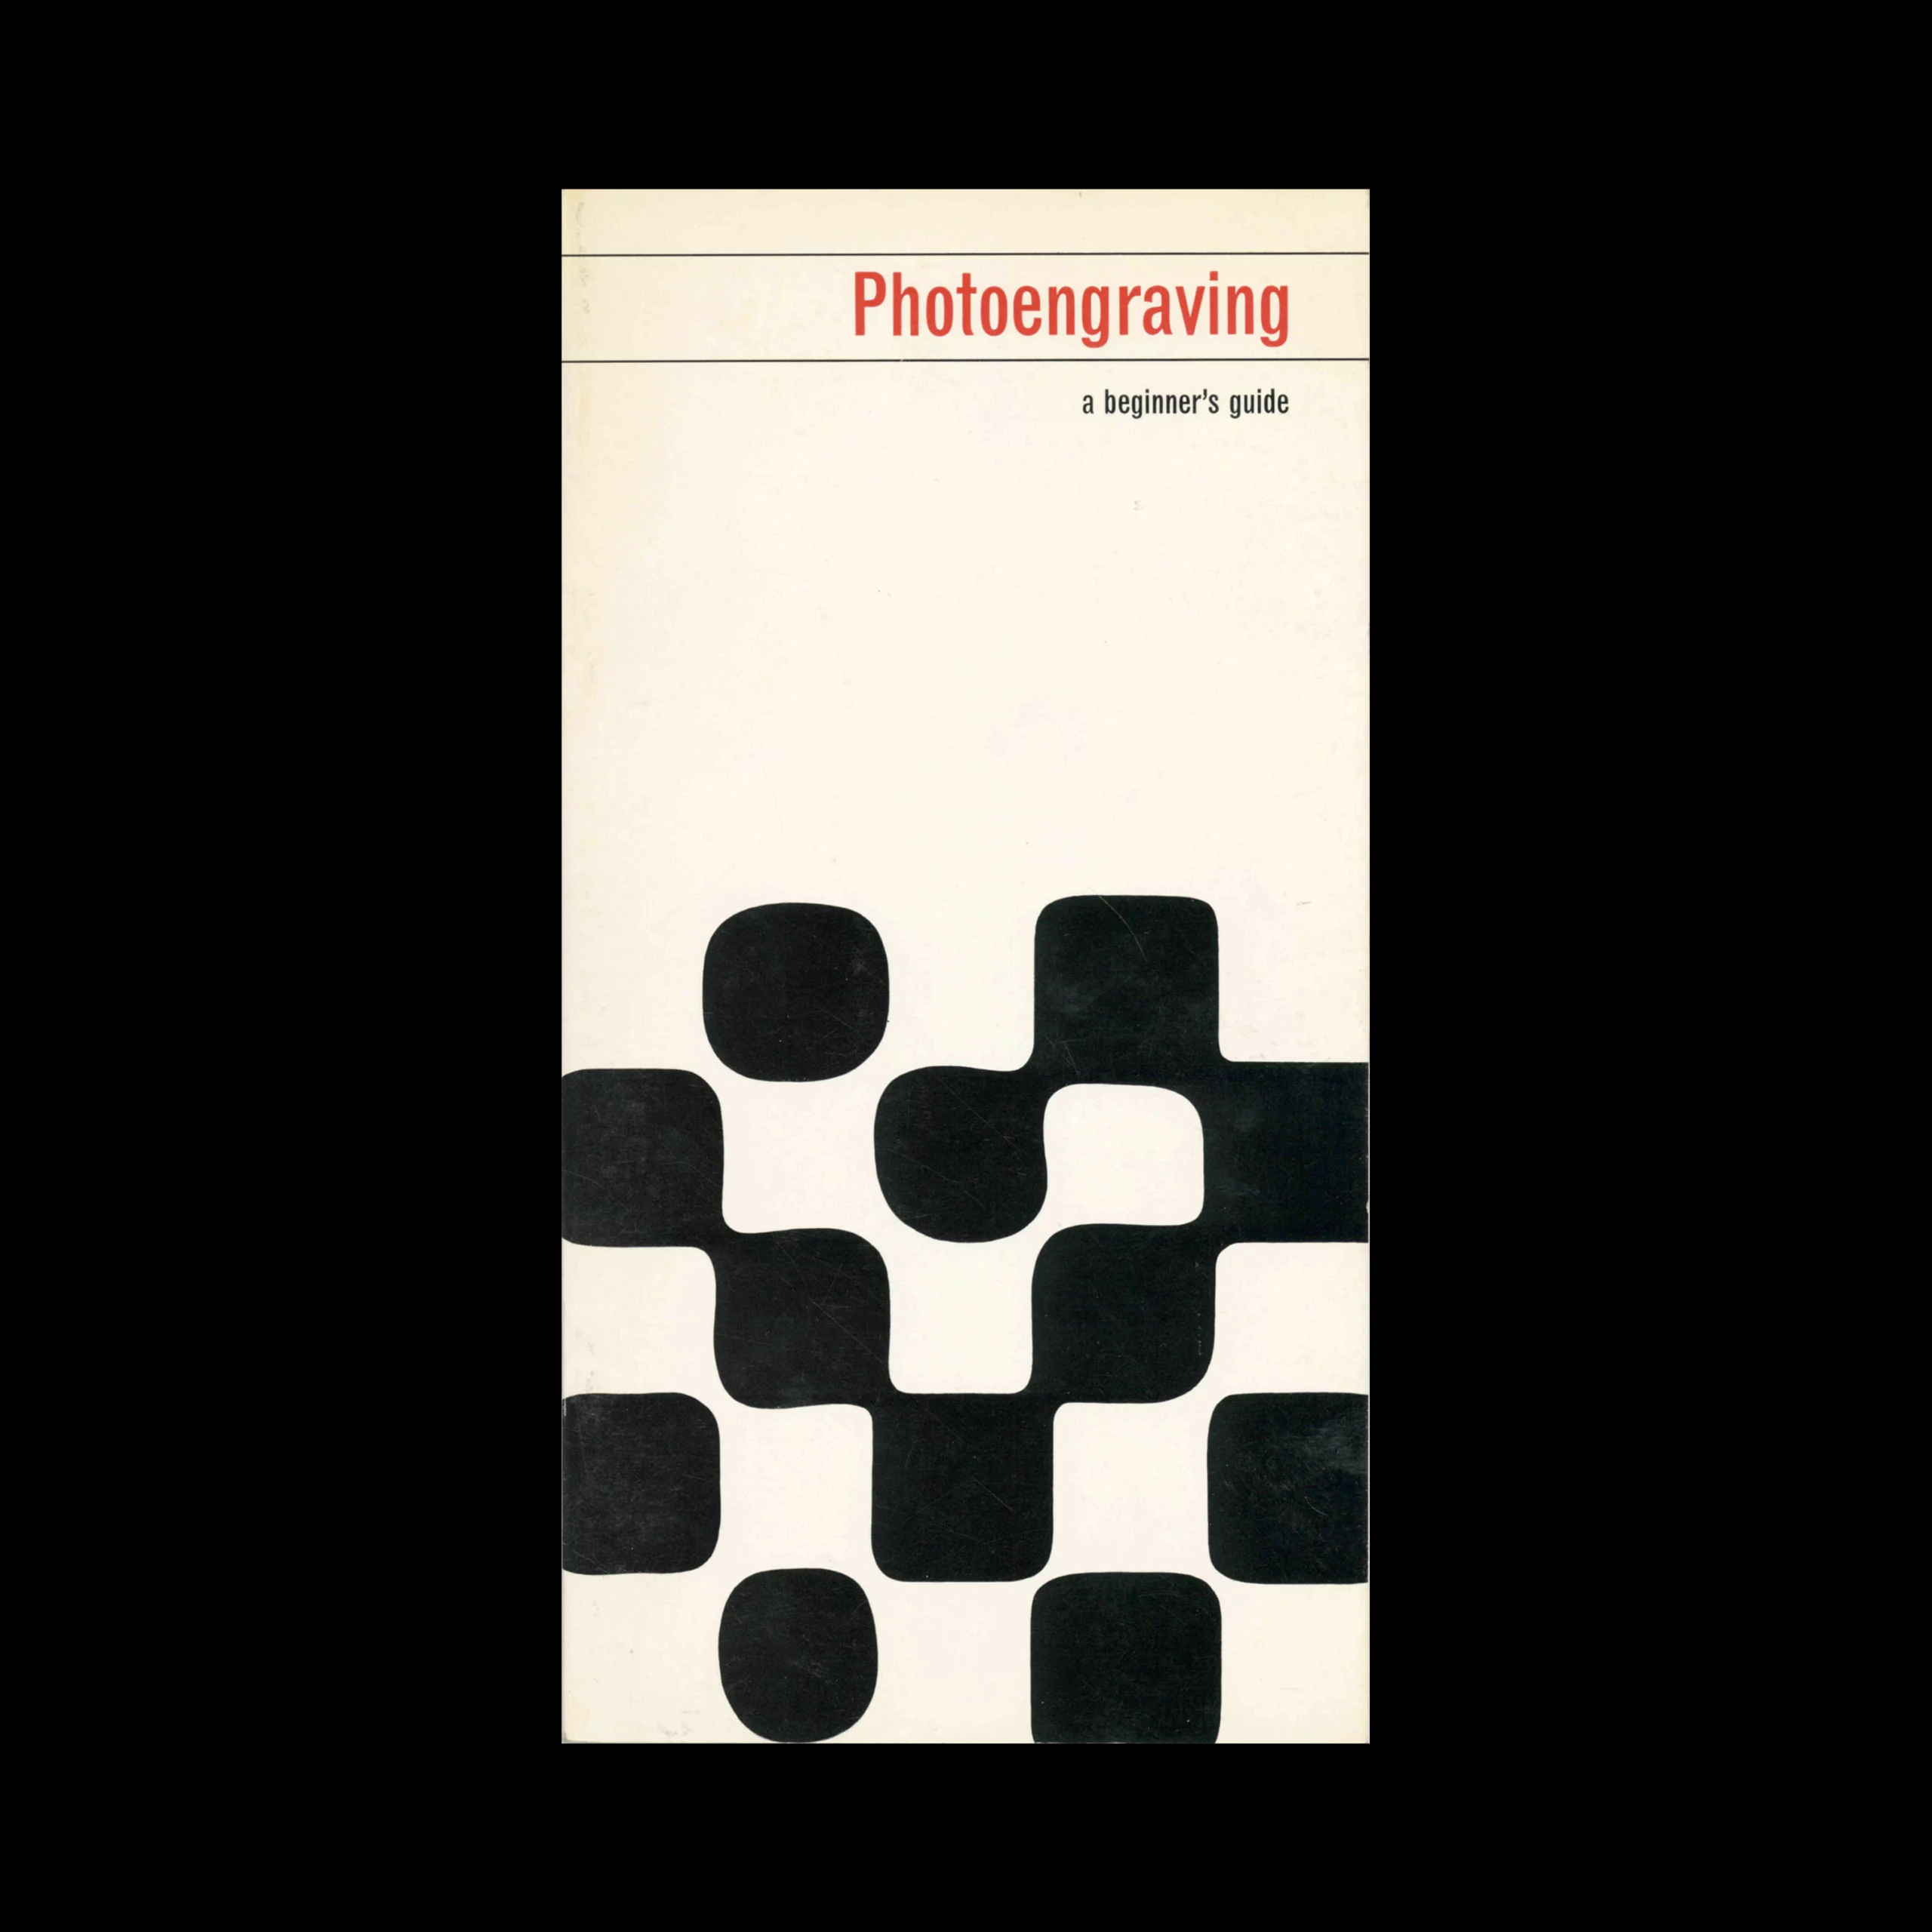 Photoengraving, a beginner’s guide, Pictorial Machinery Limited, 1960s